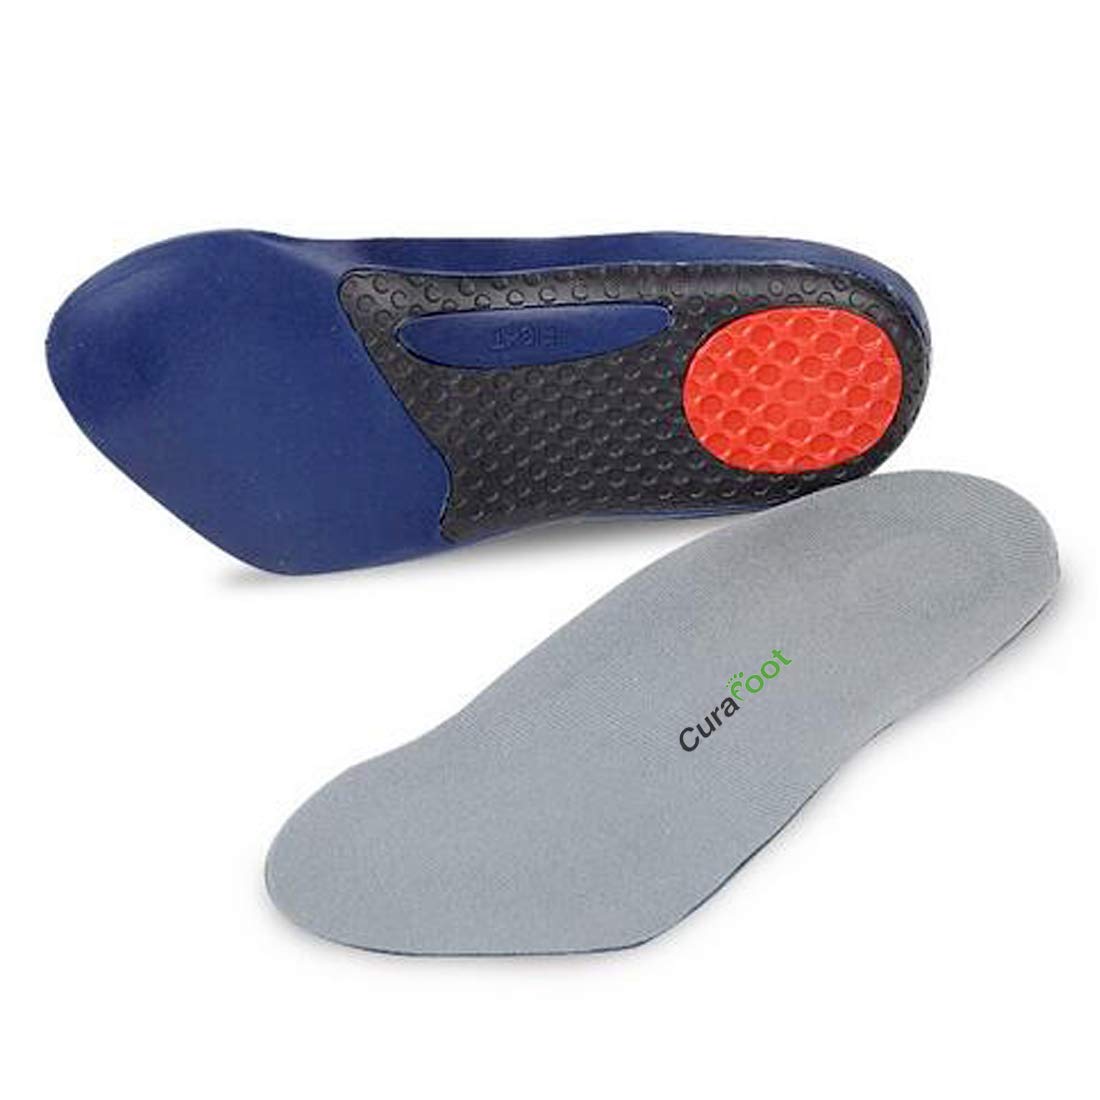 Buy CuraFoot Pain Relief Orthotics For Plantar Fasciitis Triad Insoles ...